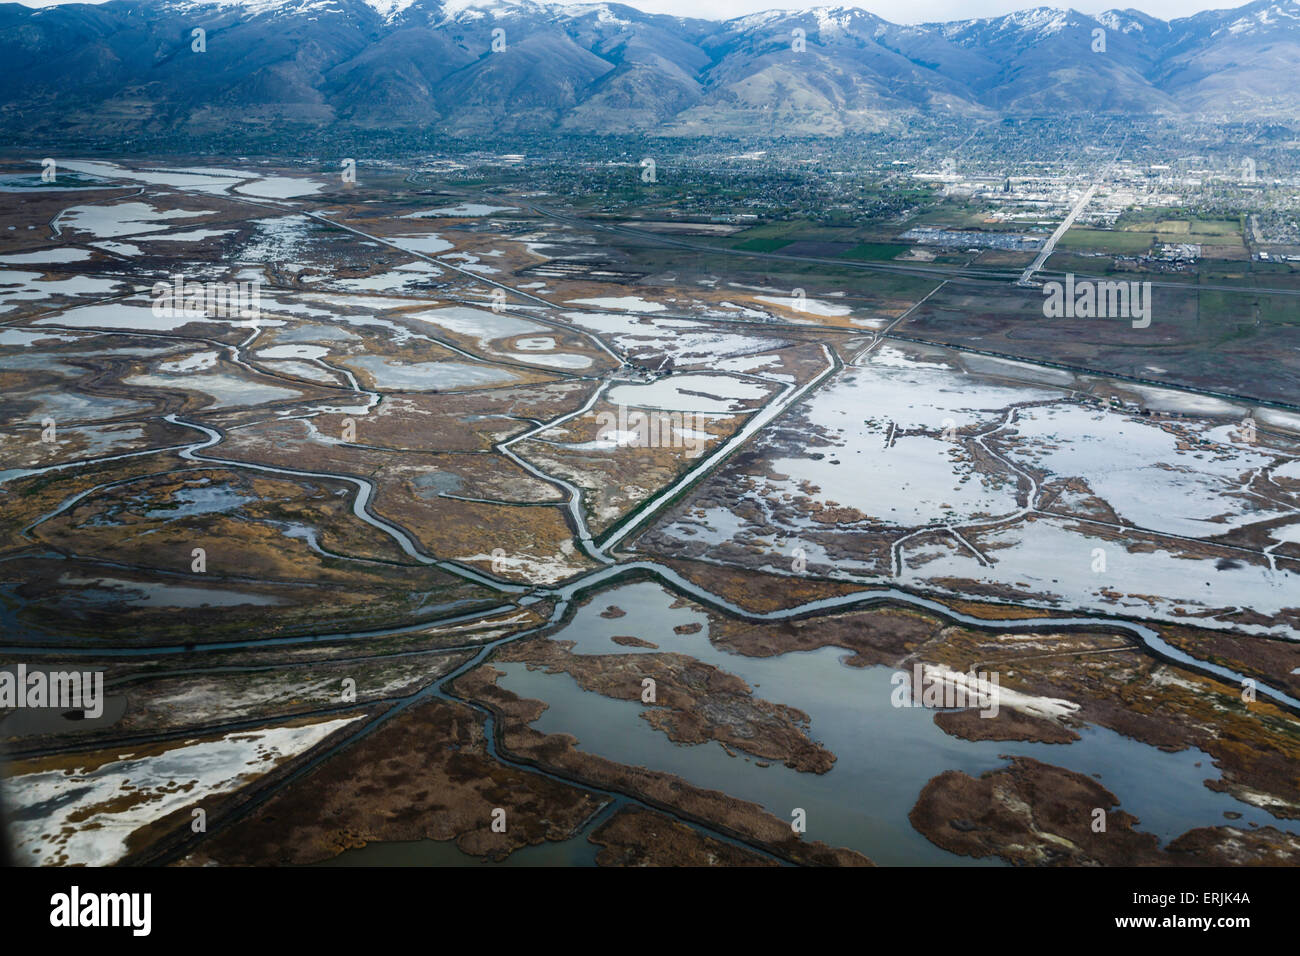 Aerial view of ponds and canal network near Salt Lake City, Utah with mountains in background Stock Photo